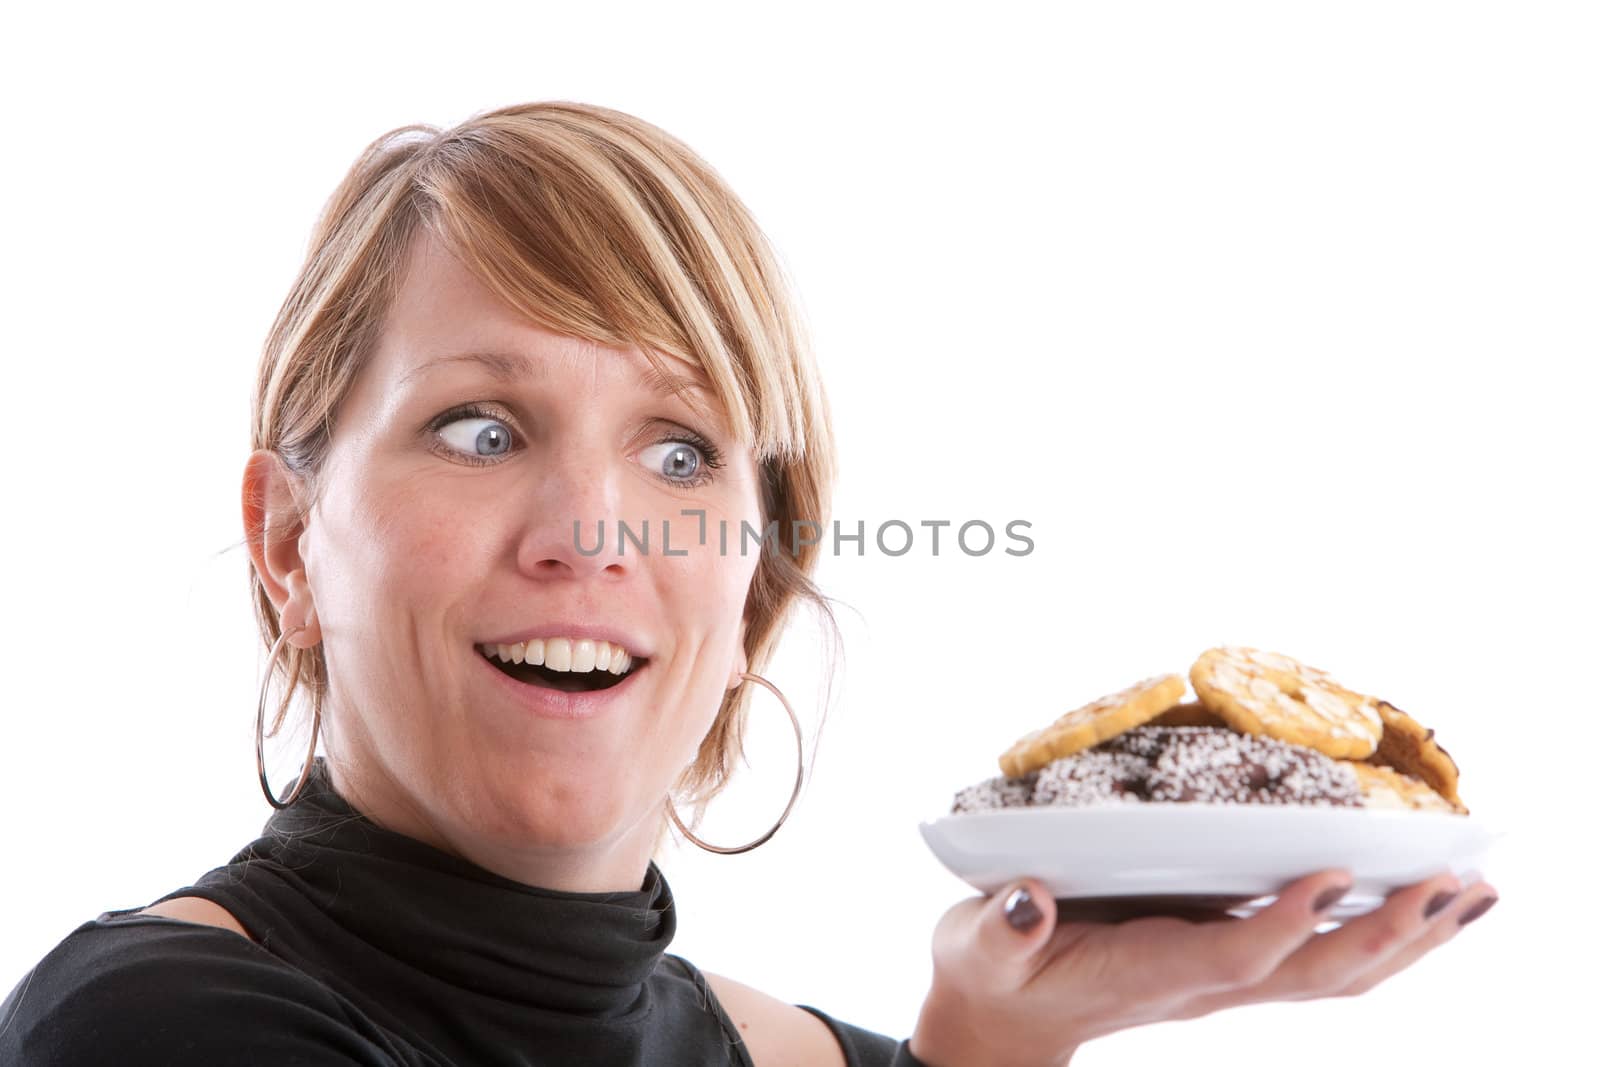 Pretty blond girl looking with excitement at a plate full of cookies